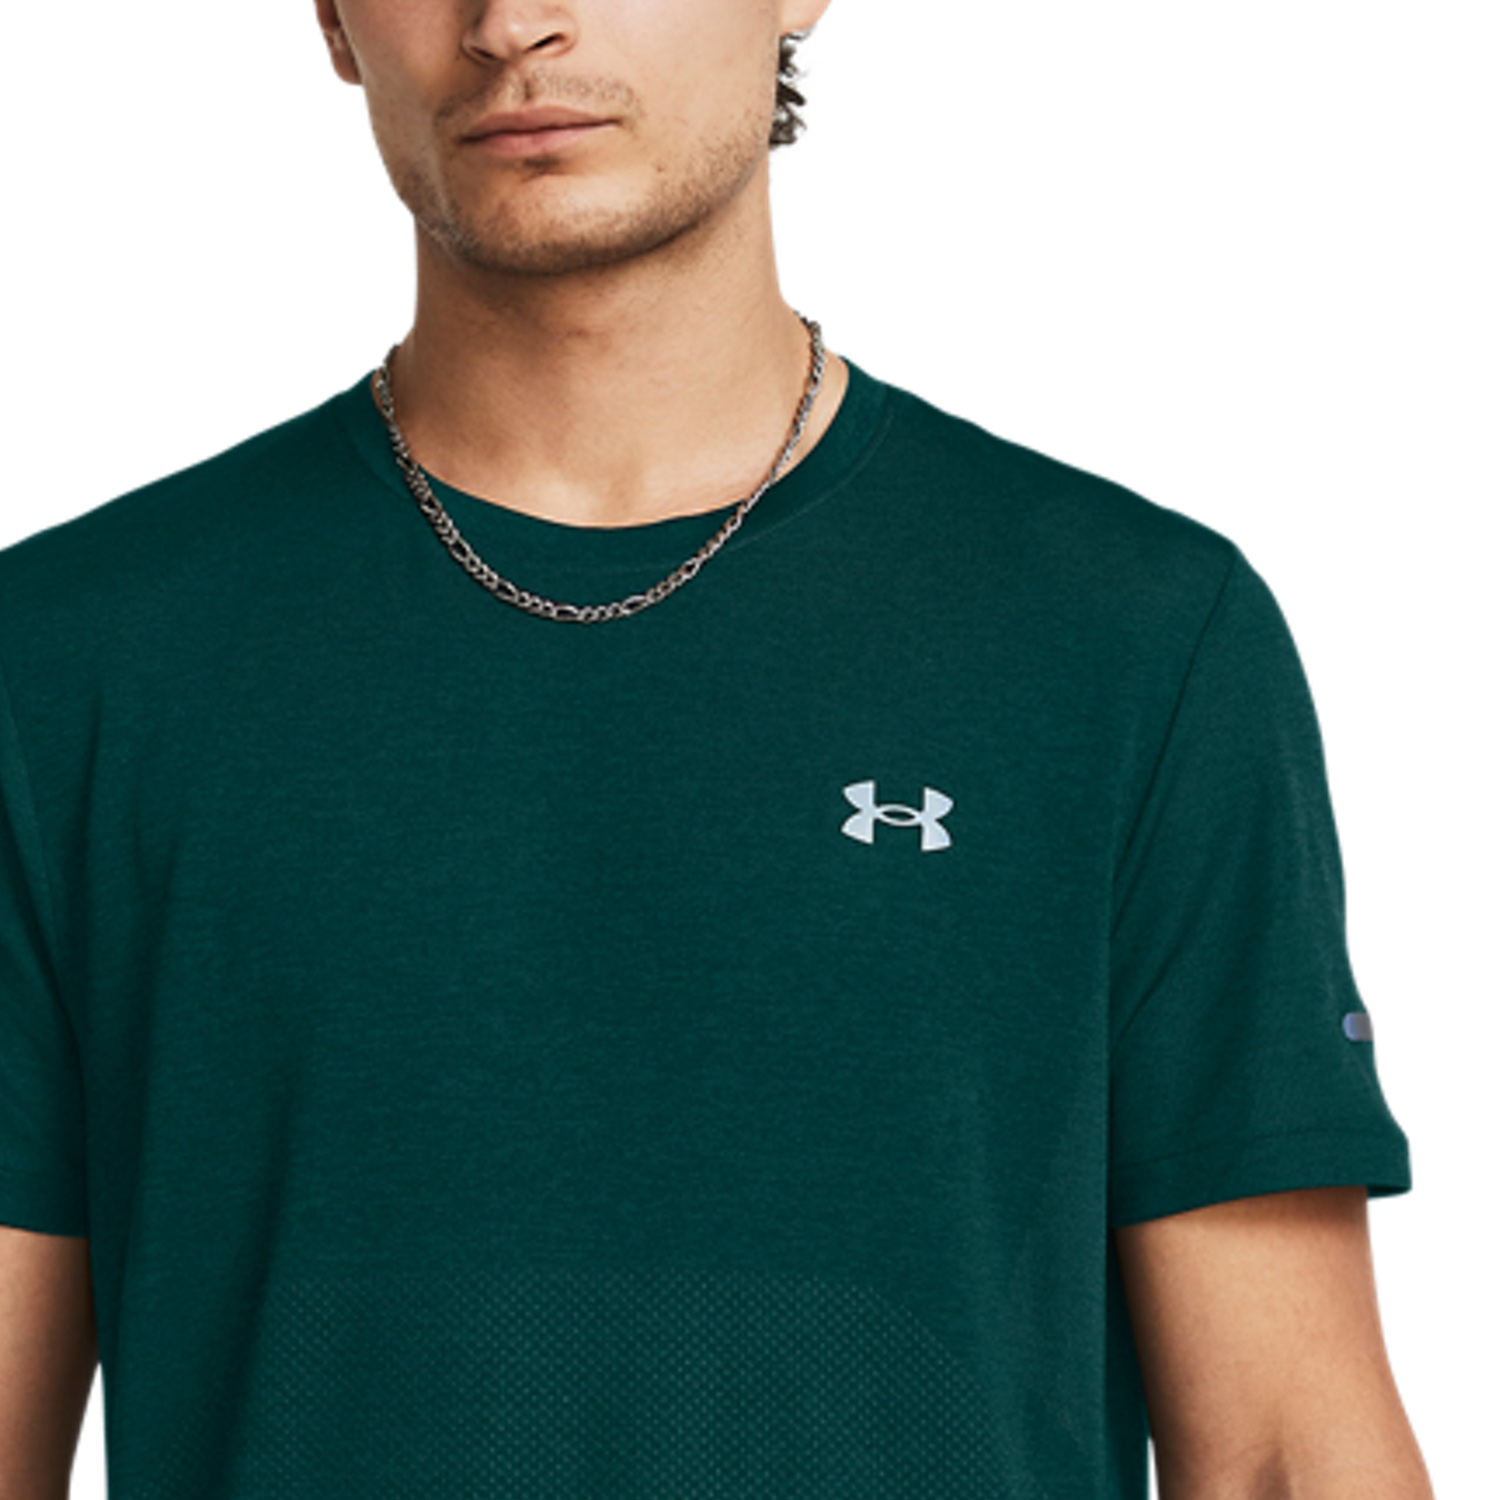 Under Armour Seamless Stride T-Shirt - Hydro Teal/Reflective